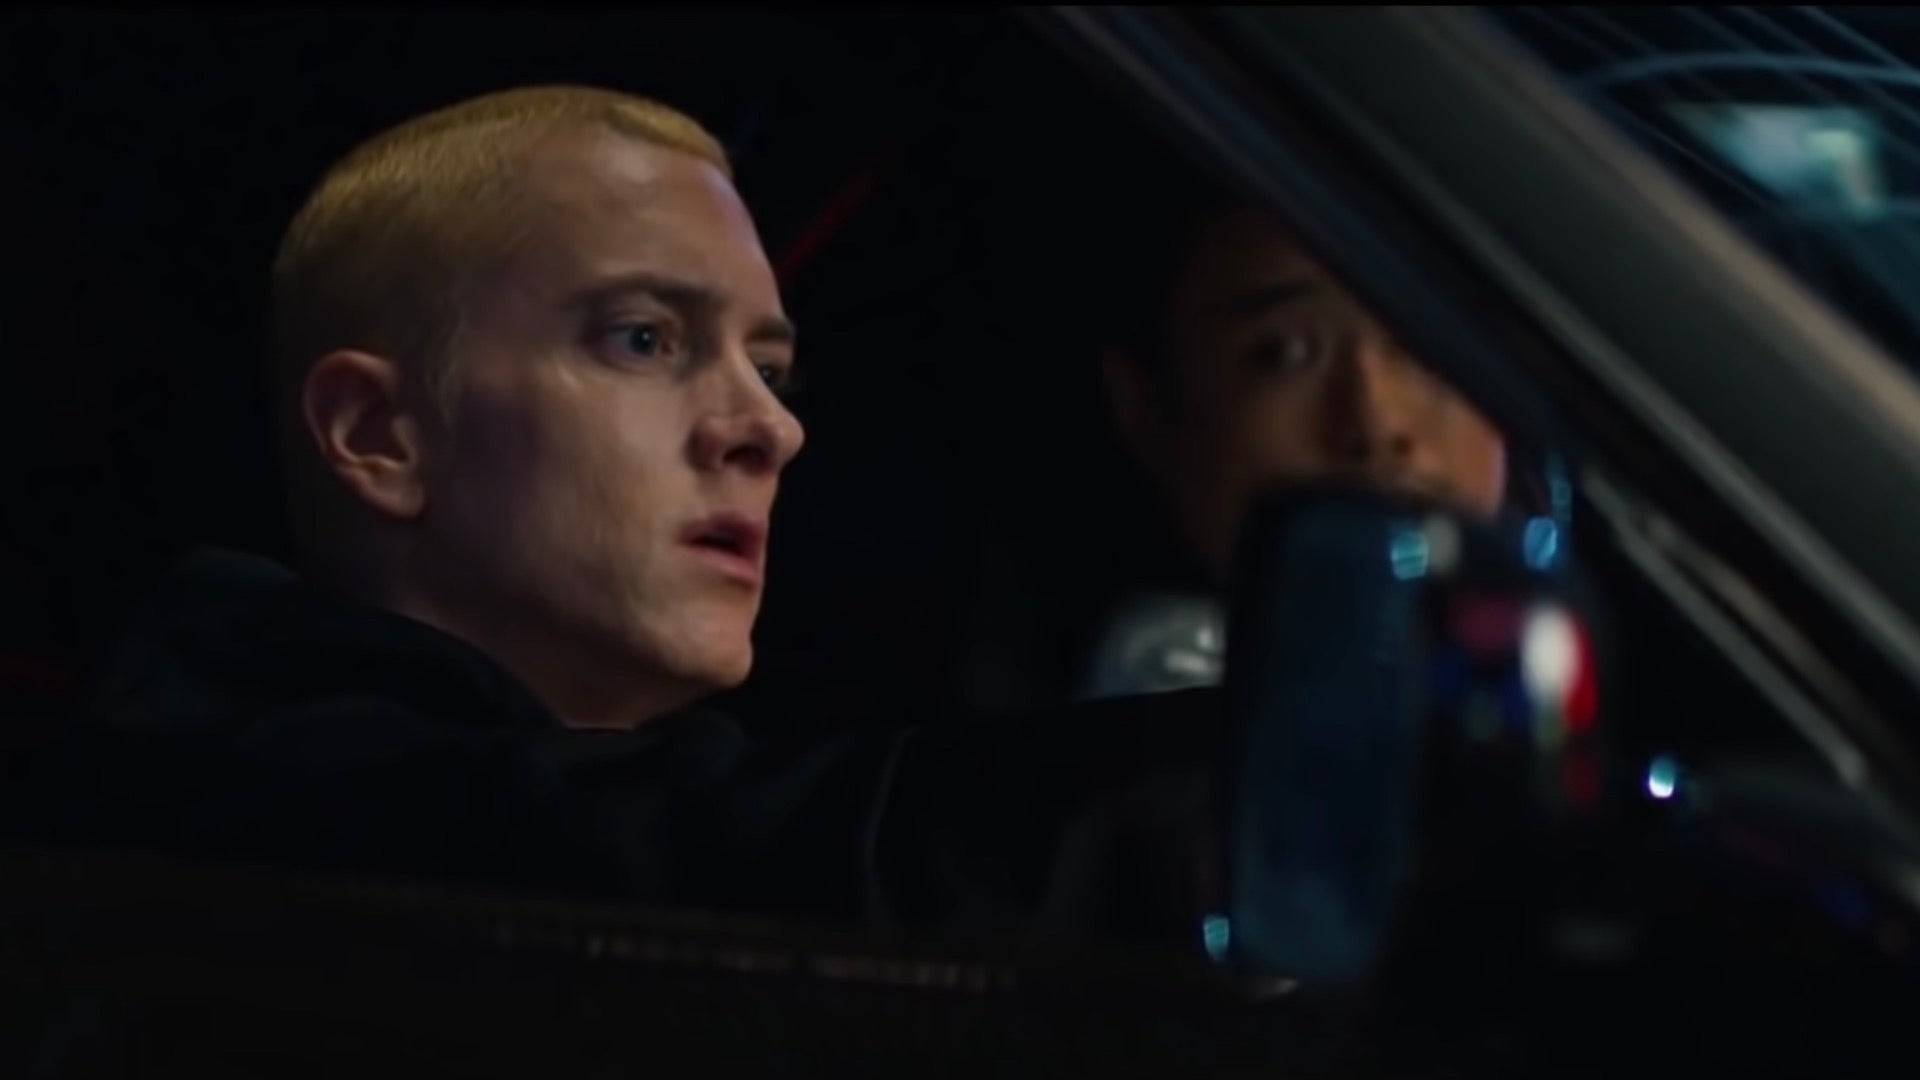 Did You Know Eminem Was Supposed to Star in the First ‘Fast & Furious’ Movie?